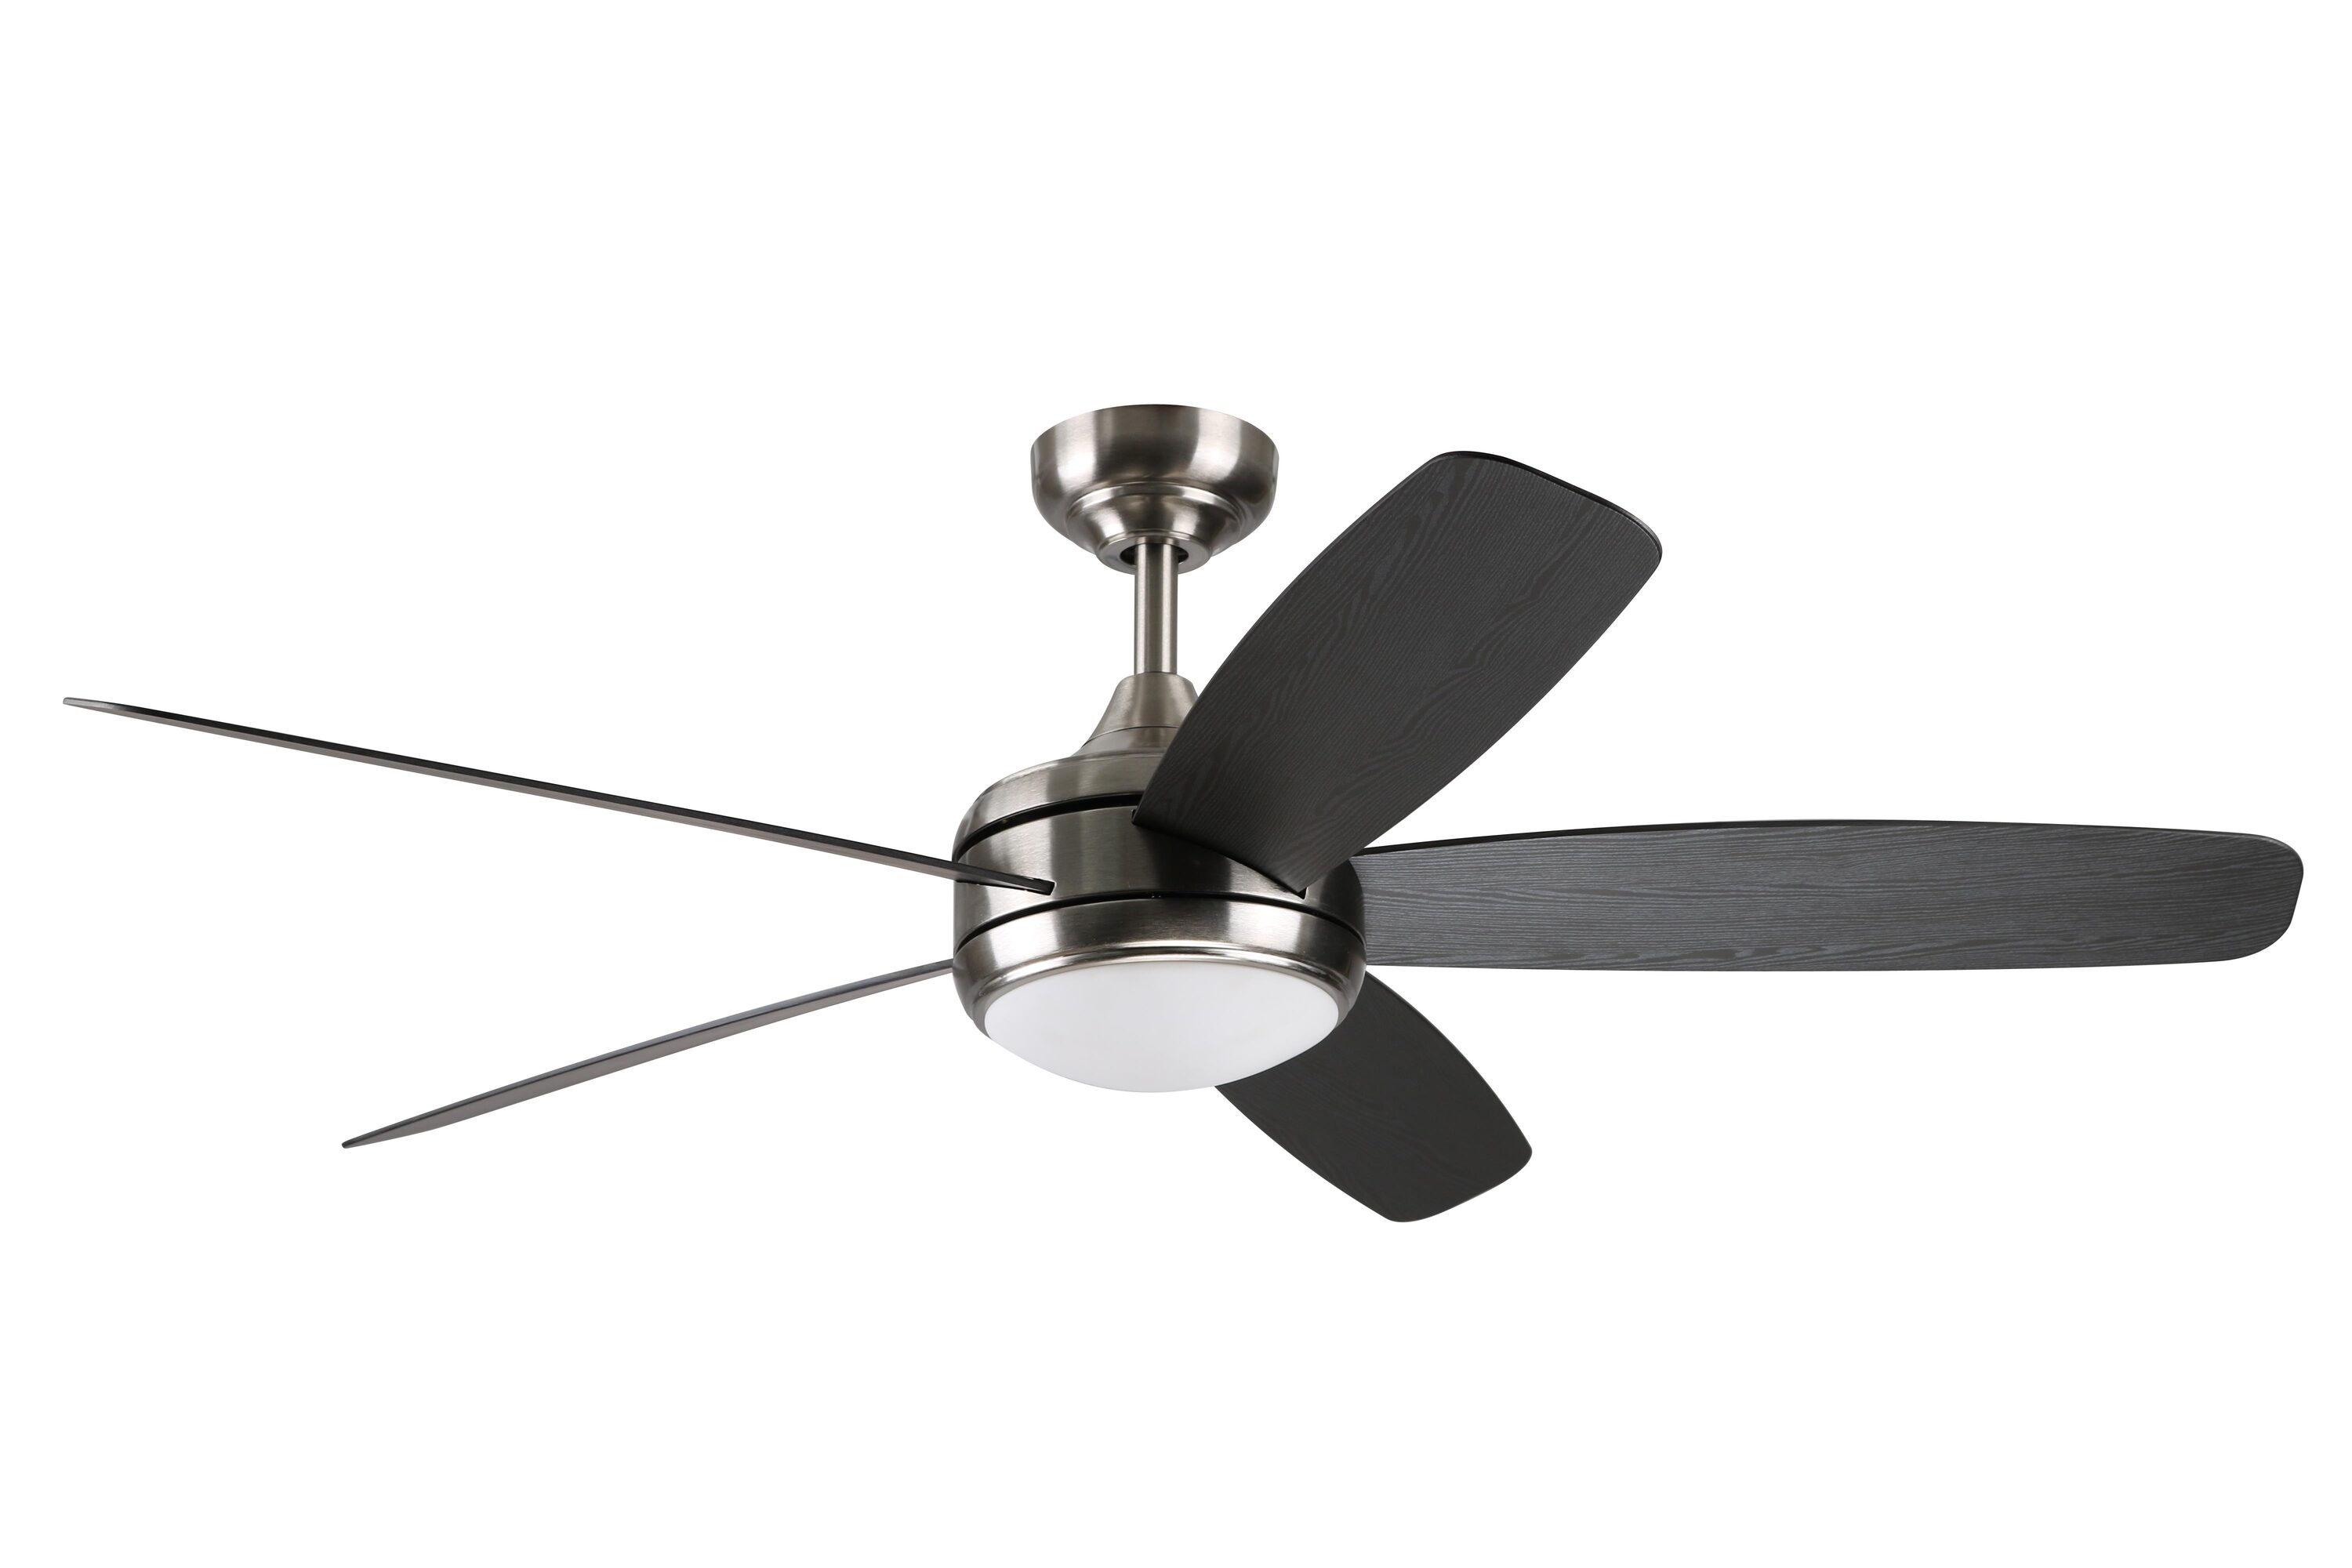 Monarch 52-in Stainless Steel LED Indoor/Outdoor Ceiling Fan with Light Remote (5-Blade) | - Harbor Breeze MOH52BNK5LRS